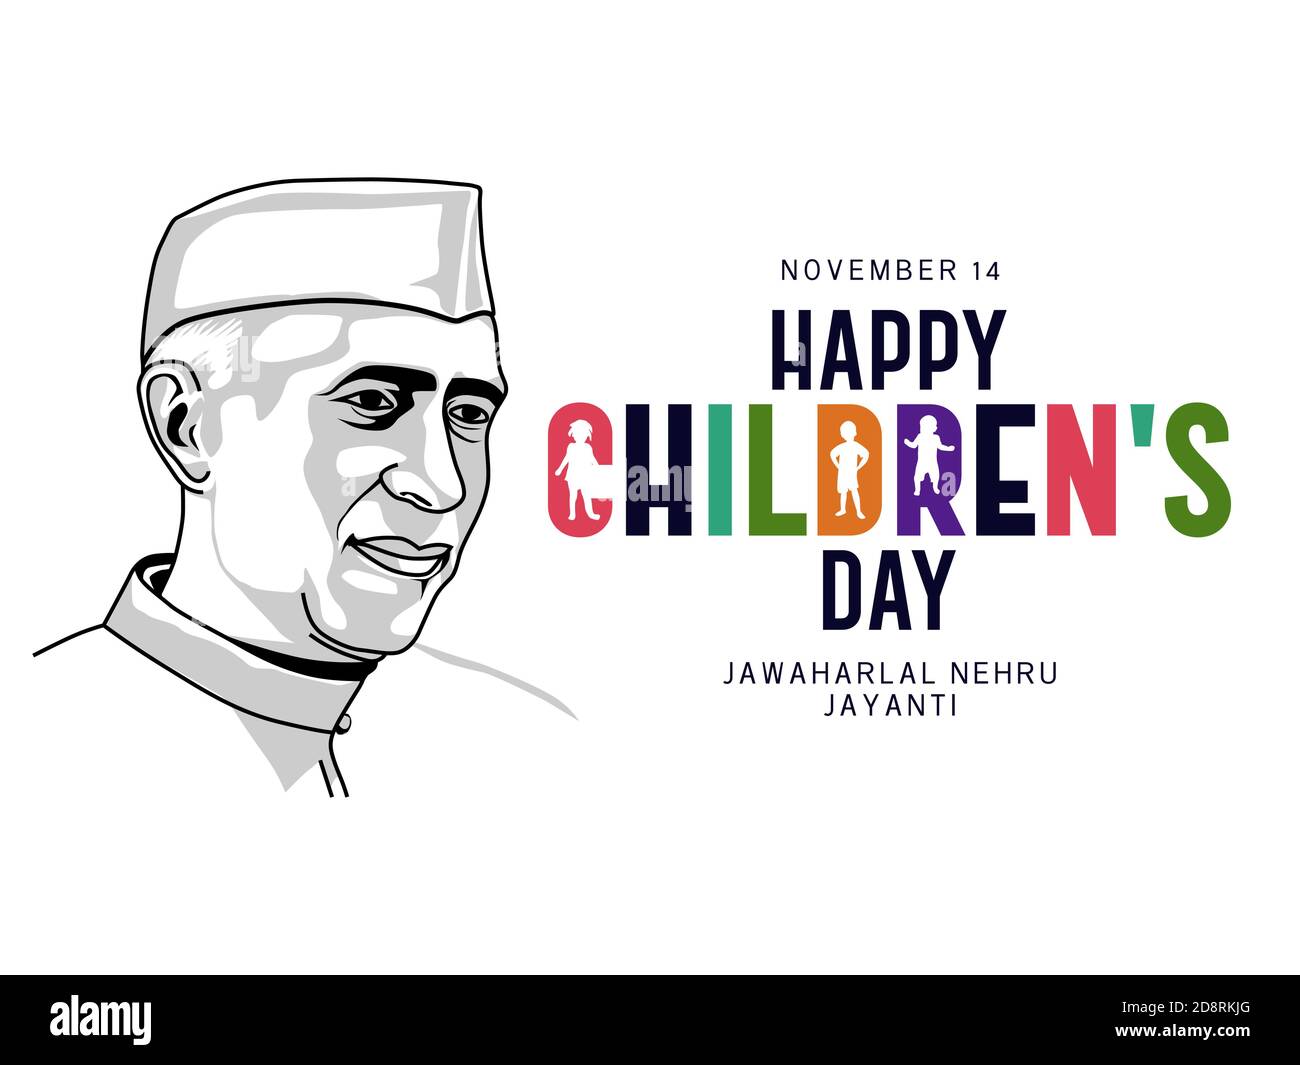 Incredible Compilation of Full 4K Children's Day Images with Nehru ...